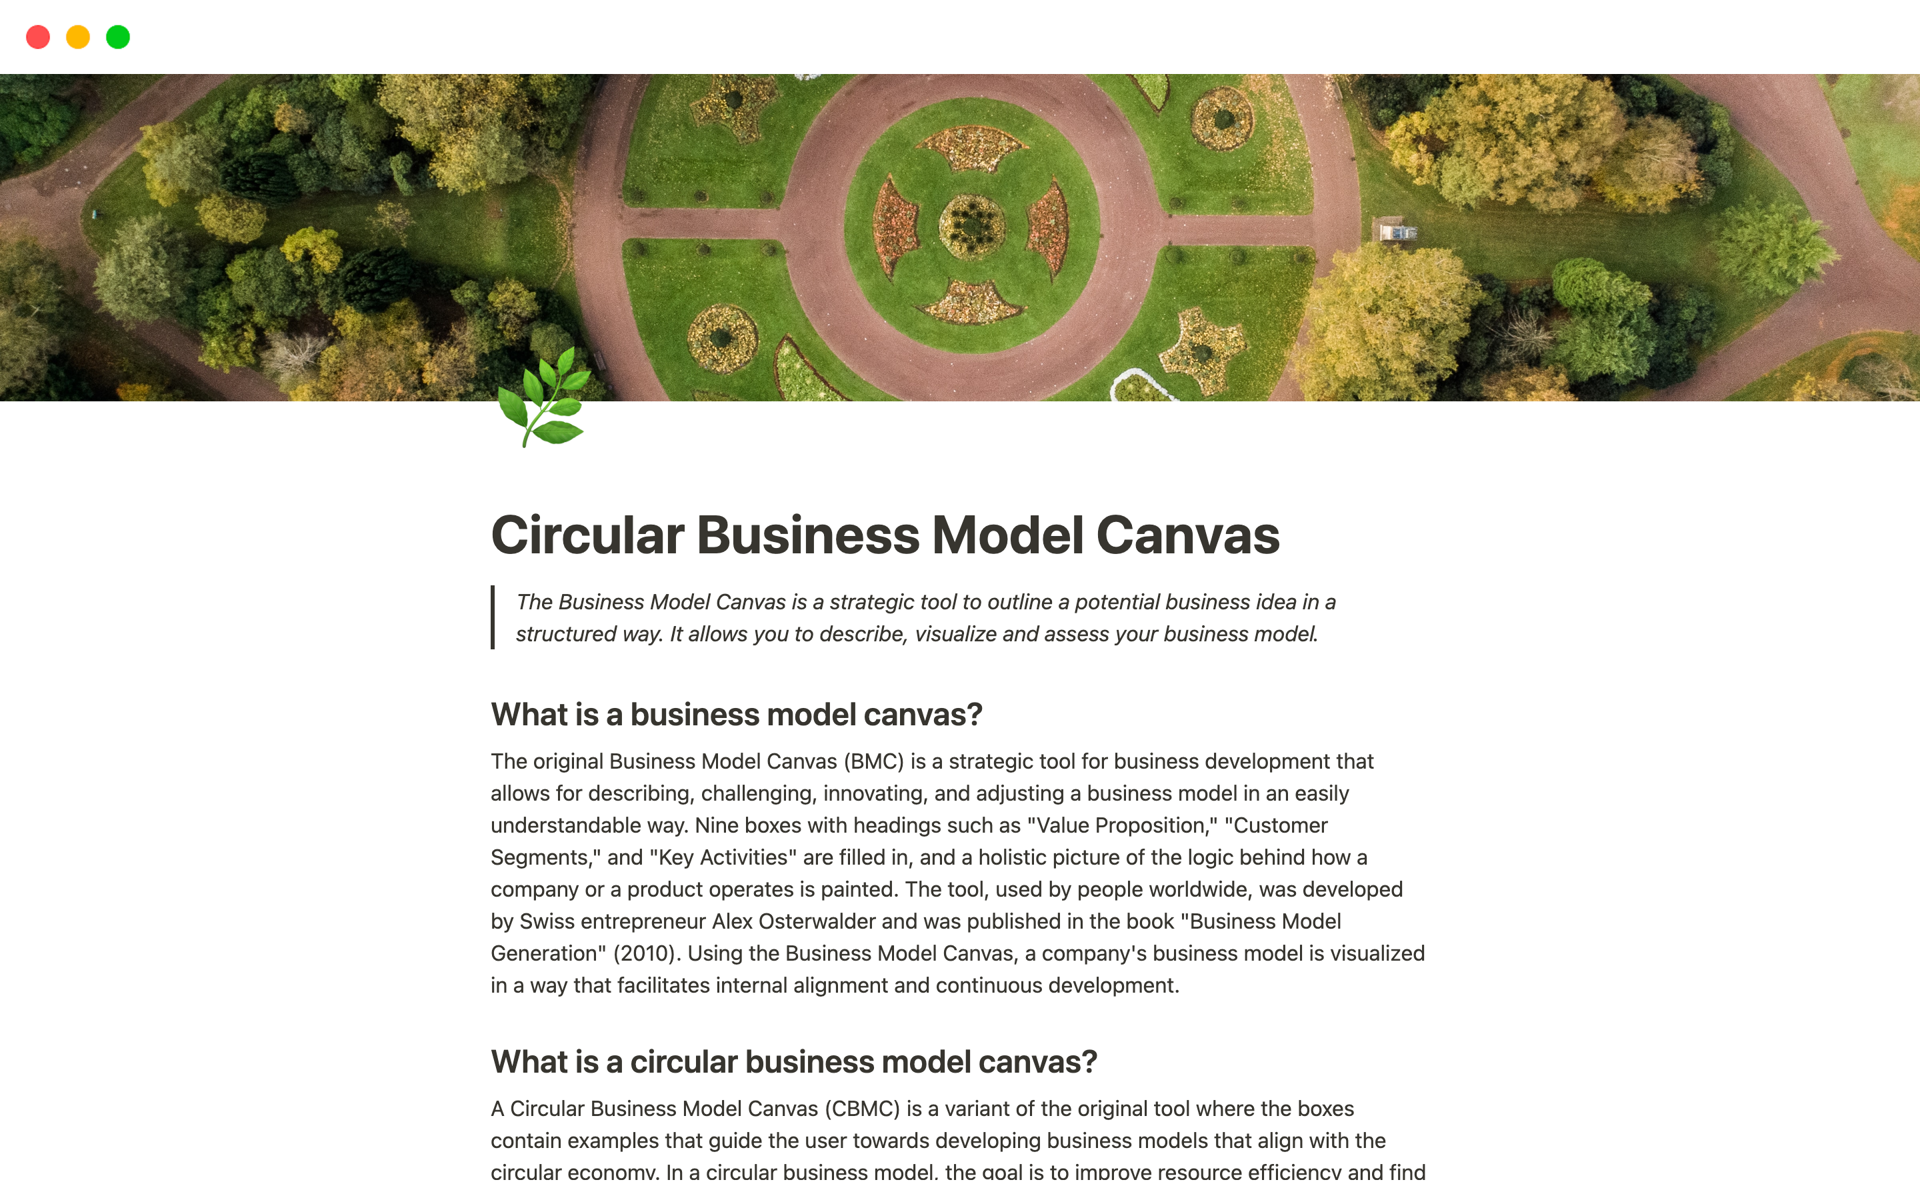 A circular business model canvas enables you to develop a circular economy-oriented business model, emphasizing resource efficiency and positive environmental impact.